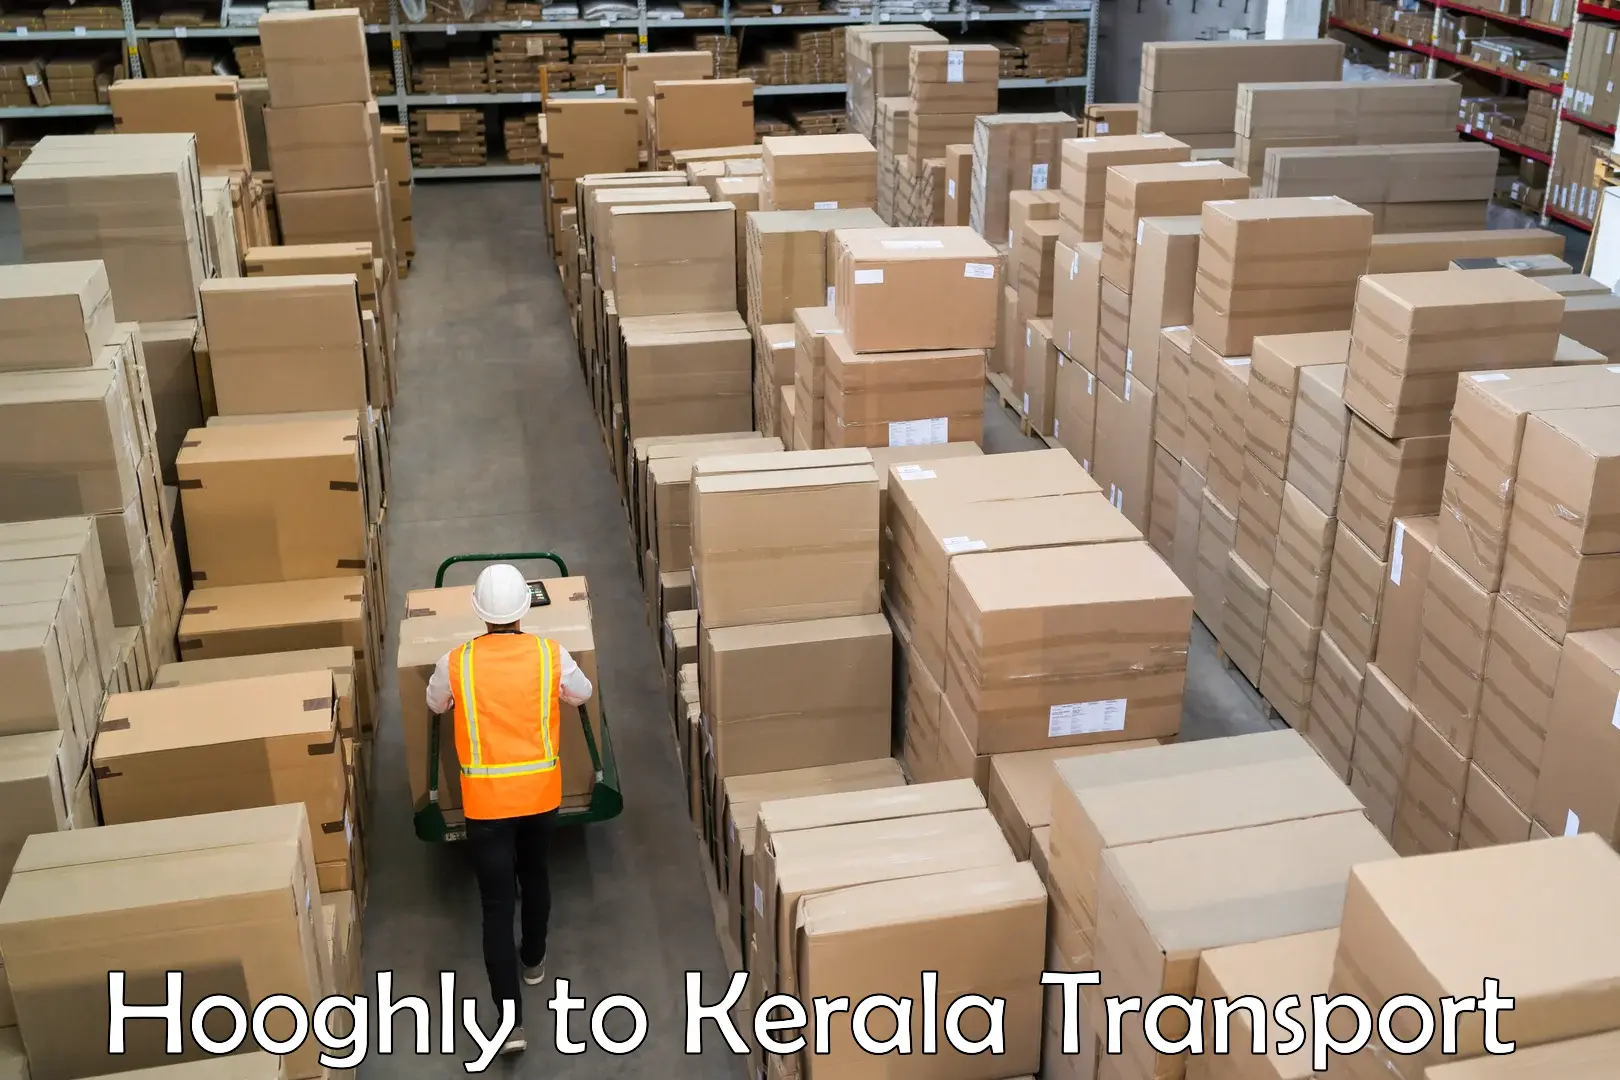 Commercial transport service Hooghly to Kazhakkoottam